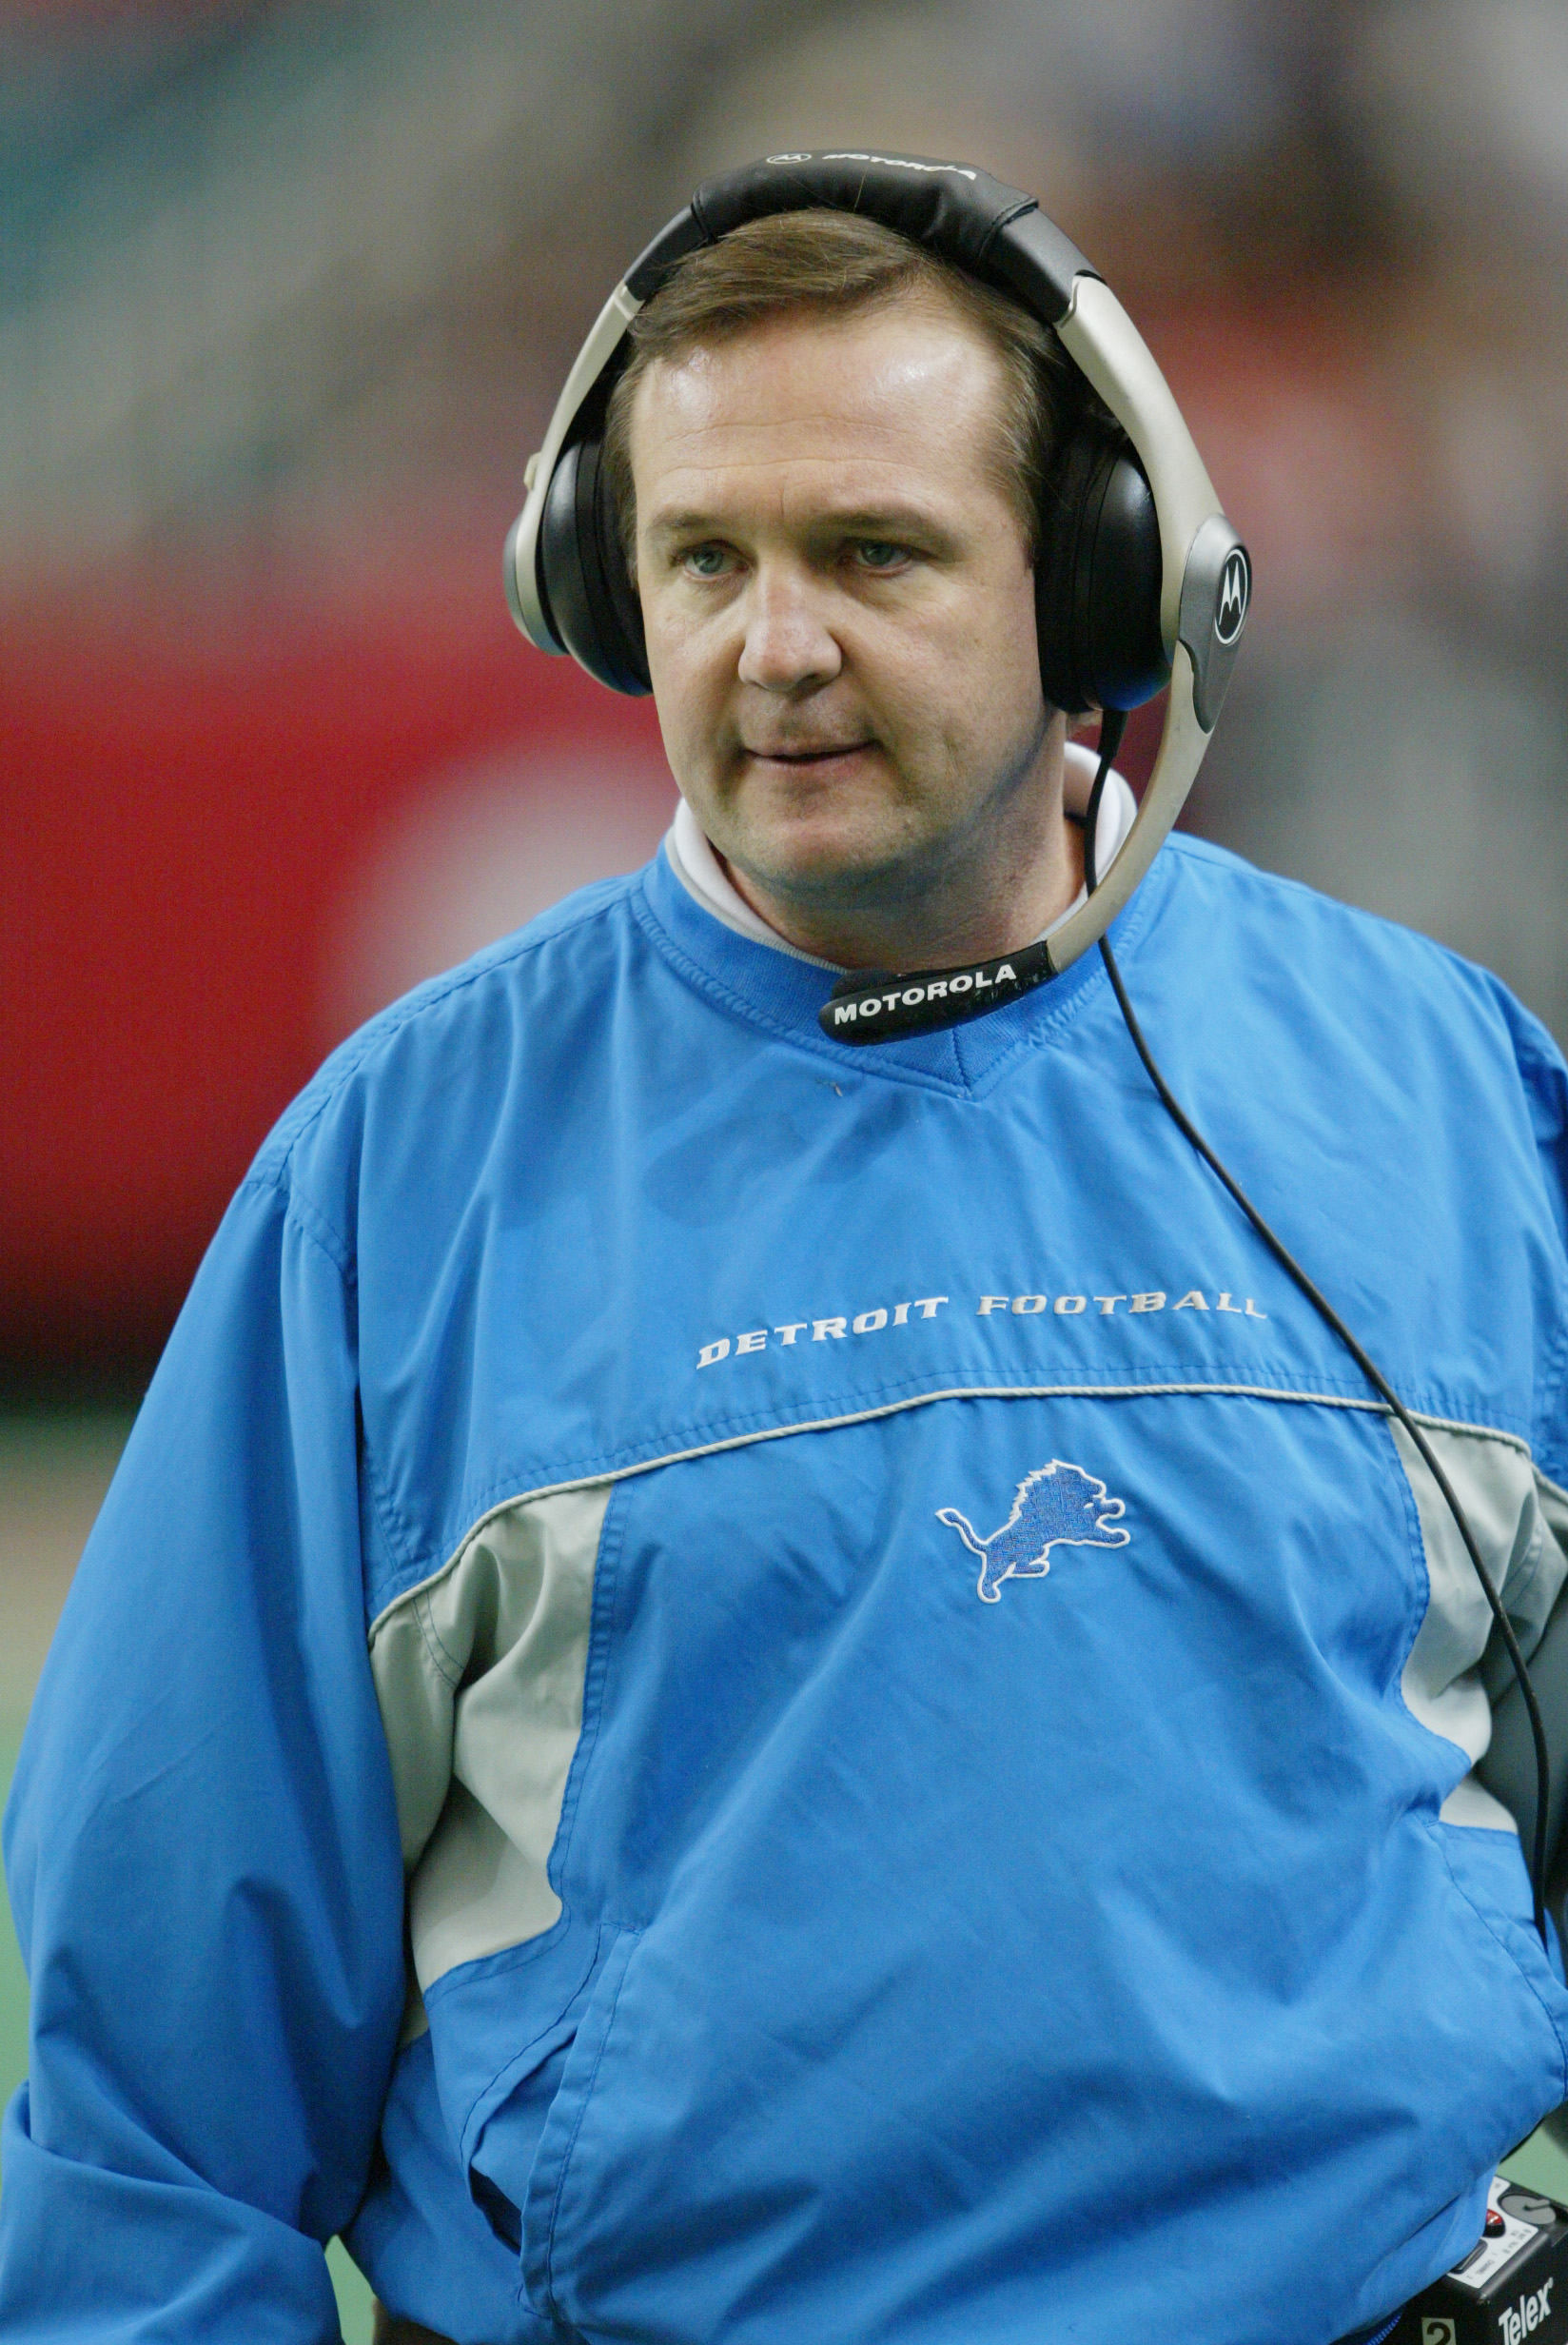 ATLANTA - DECEMBER 22:  Head coach Marty Mornhinweg of the Detroit Lions looks on from the sideline during the NFL game against the Atlanta Falcons at the Georgia Dome on December 22, 2002 in Atlanta, Georgia.  The Falcons defeated the Lions 36-15. (Photo